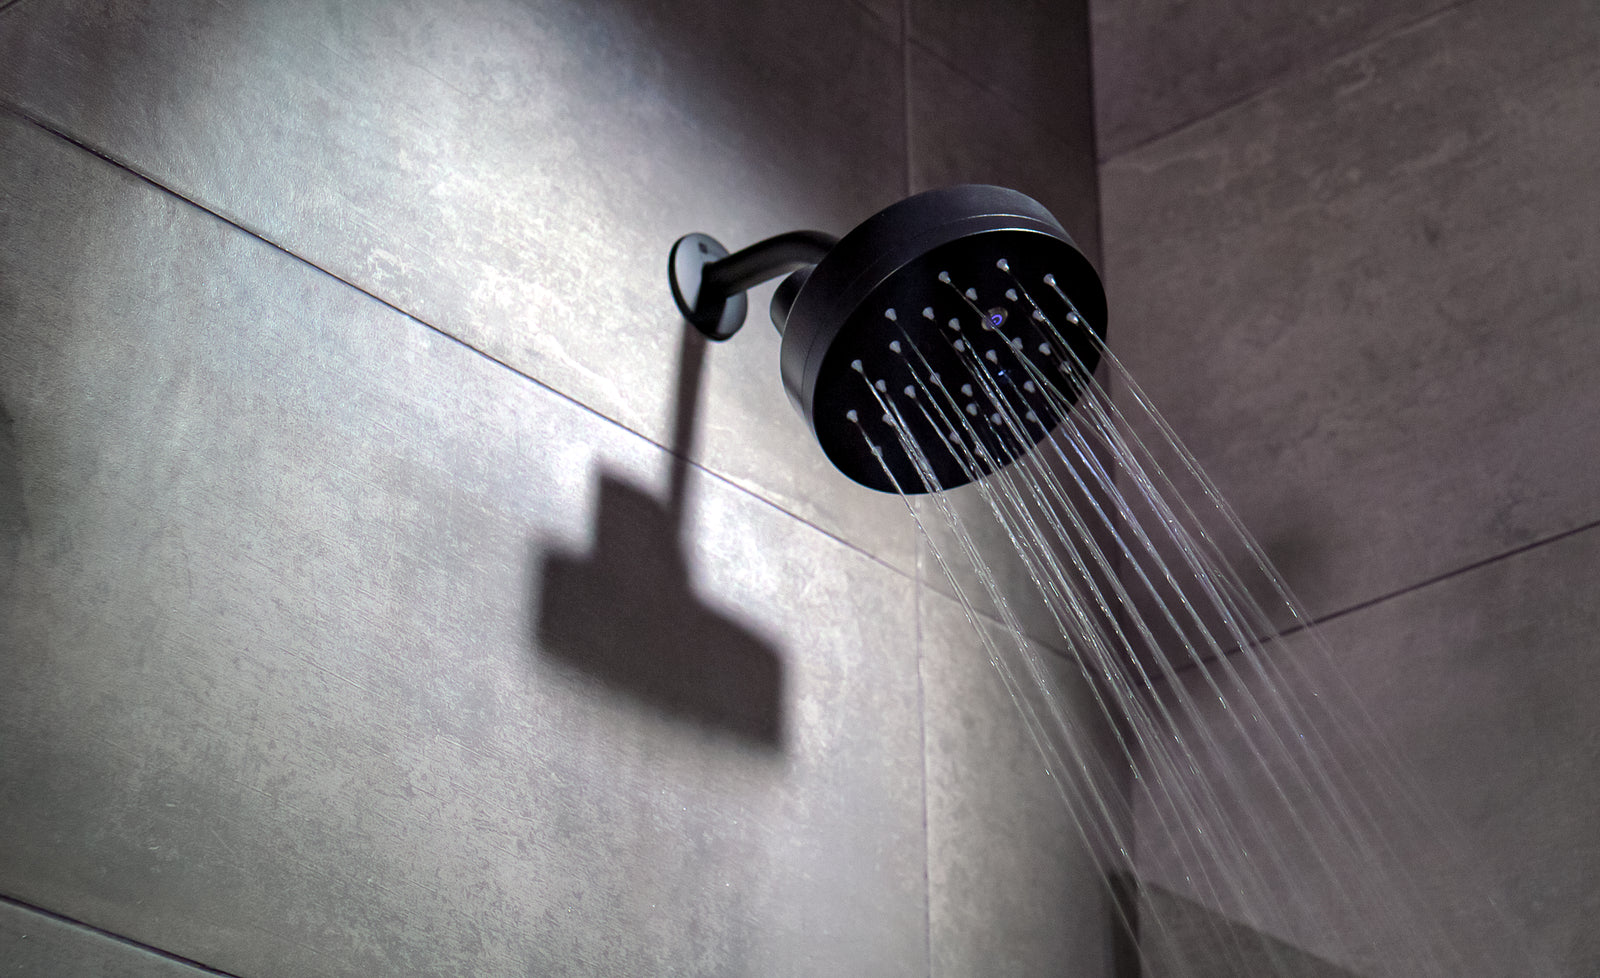 Dry Water Inc. Announces The Launch of Power Shower: The World's First Fully Integrated Smart Home Shower Head